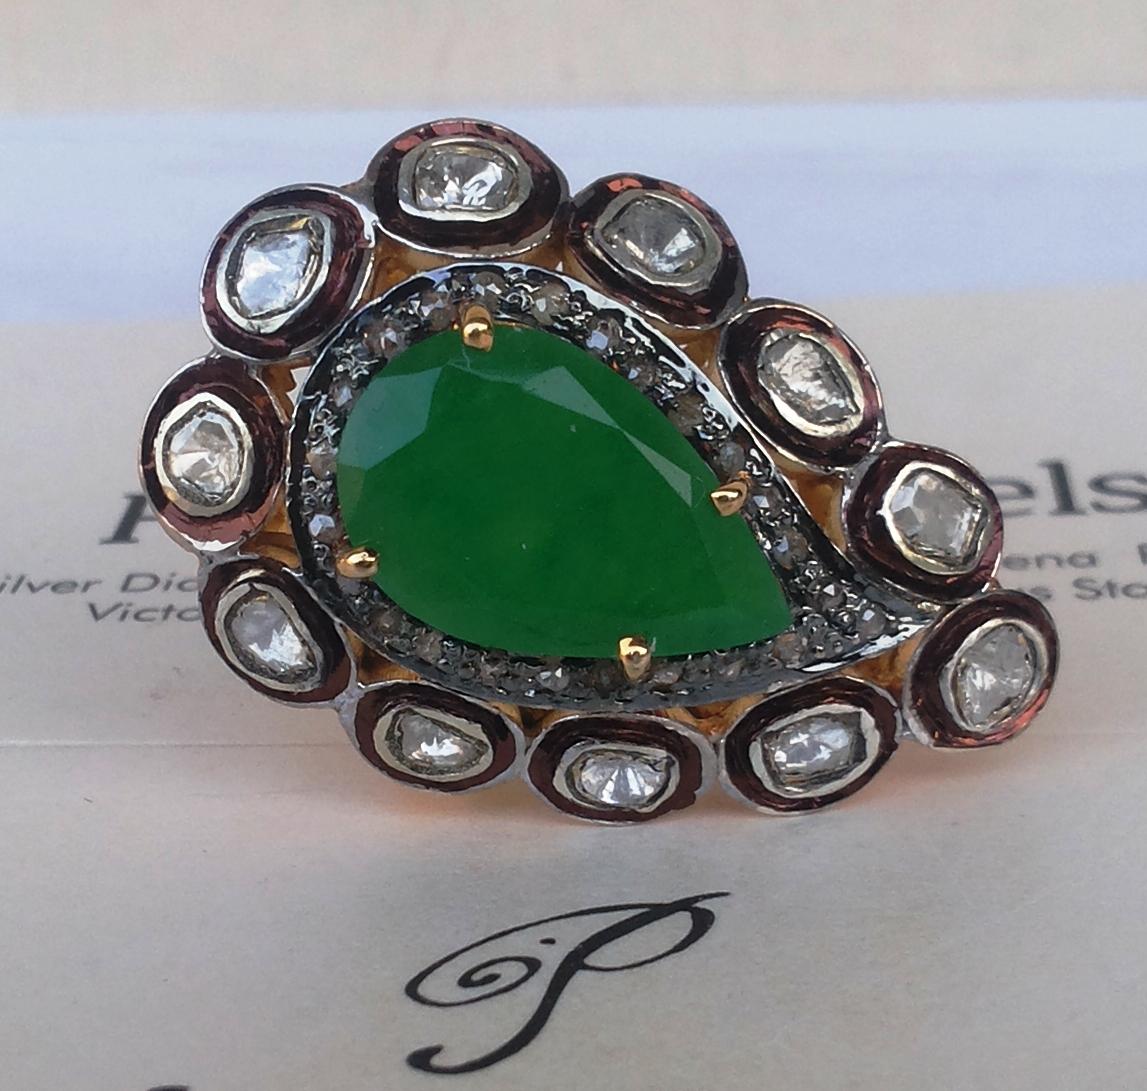 Beautiful natural diamond green onyx sterling silver gold plated ring consists of-

-Diamond- uncut diamonds

- Diamond type- natural (certified)

-Diamond color- white with tint of yellow

-Diamond weight- 2.90ctw

-Metal- 925 Sterling